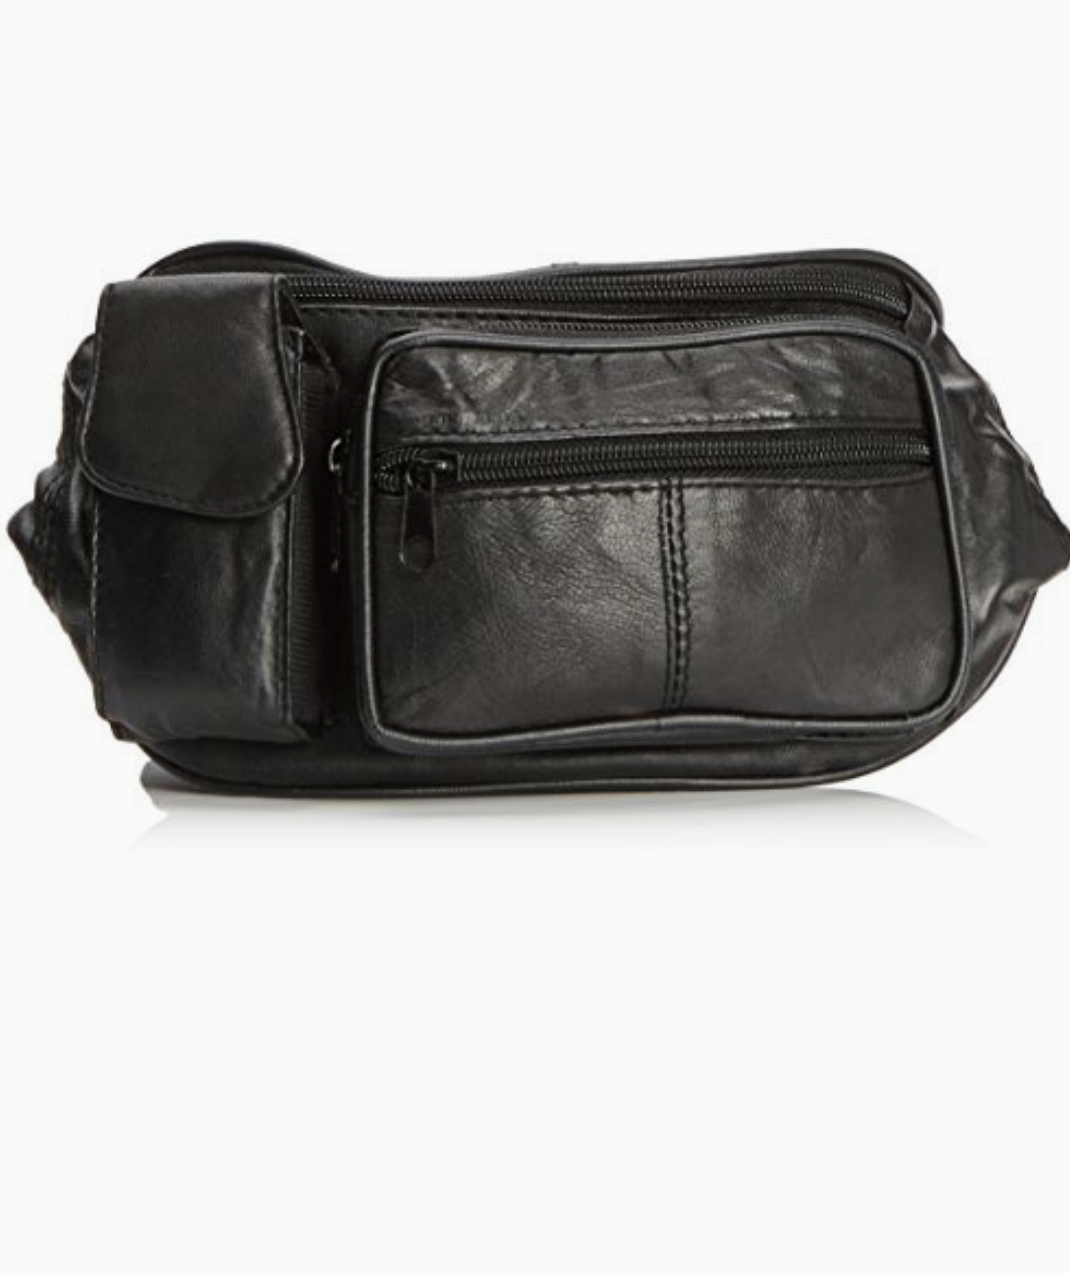 Lorenz 1447 Leather travel Bum Bag Fanny Pack with phone holder